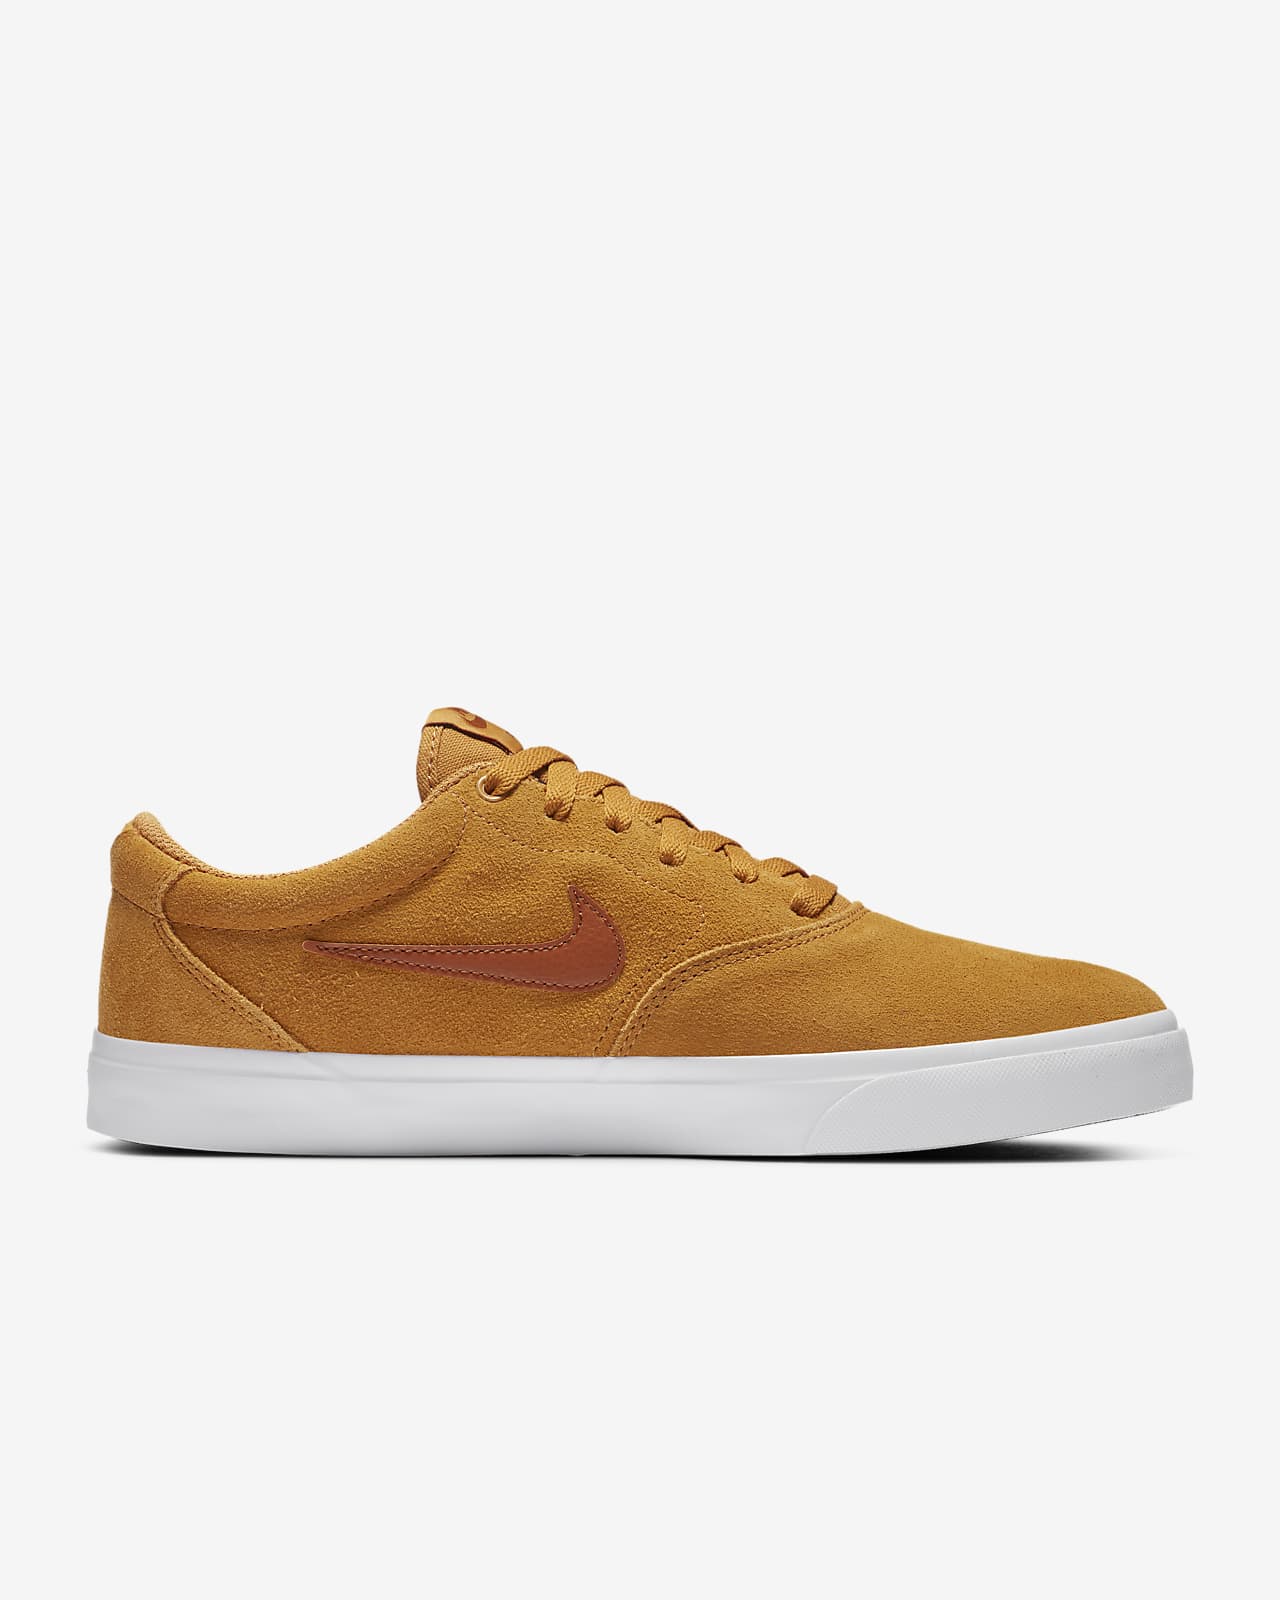 nike sb charge suede men's skate shoes